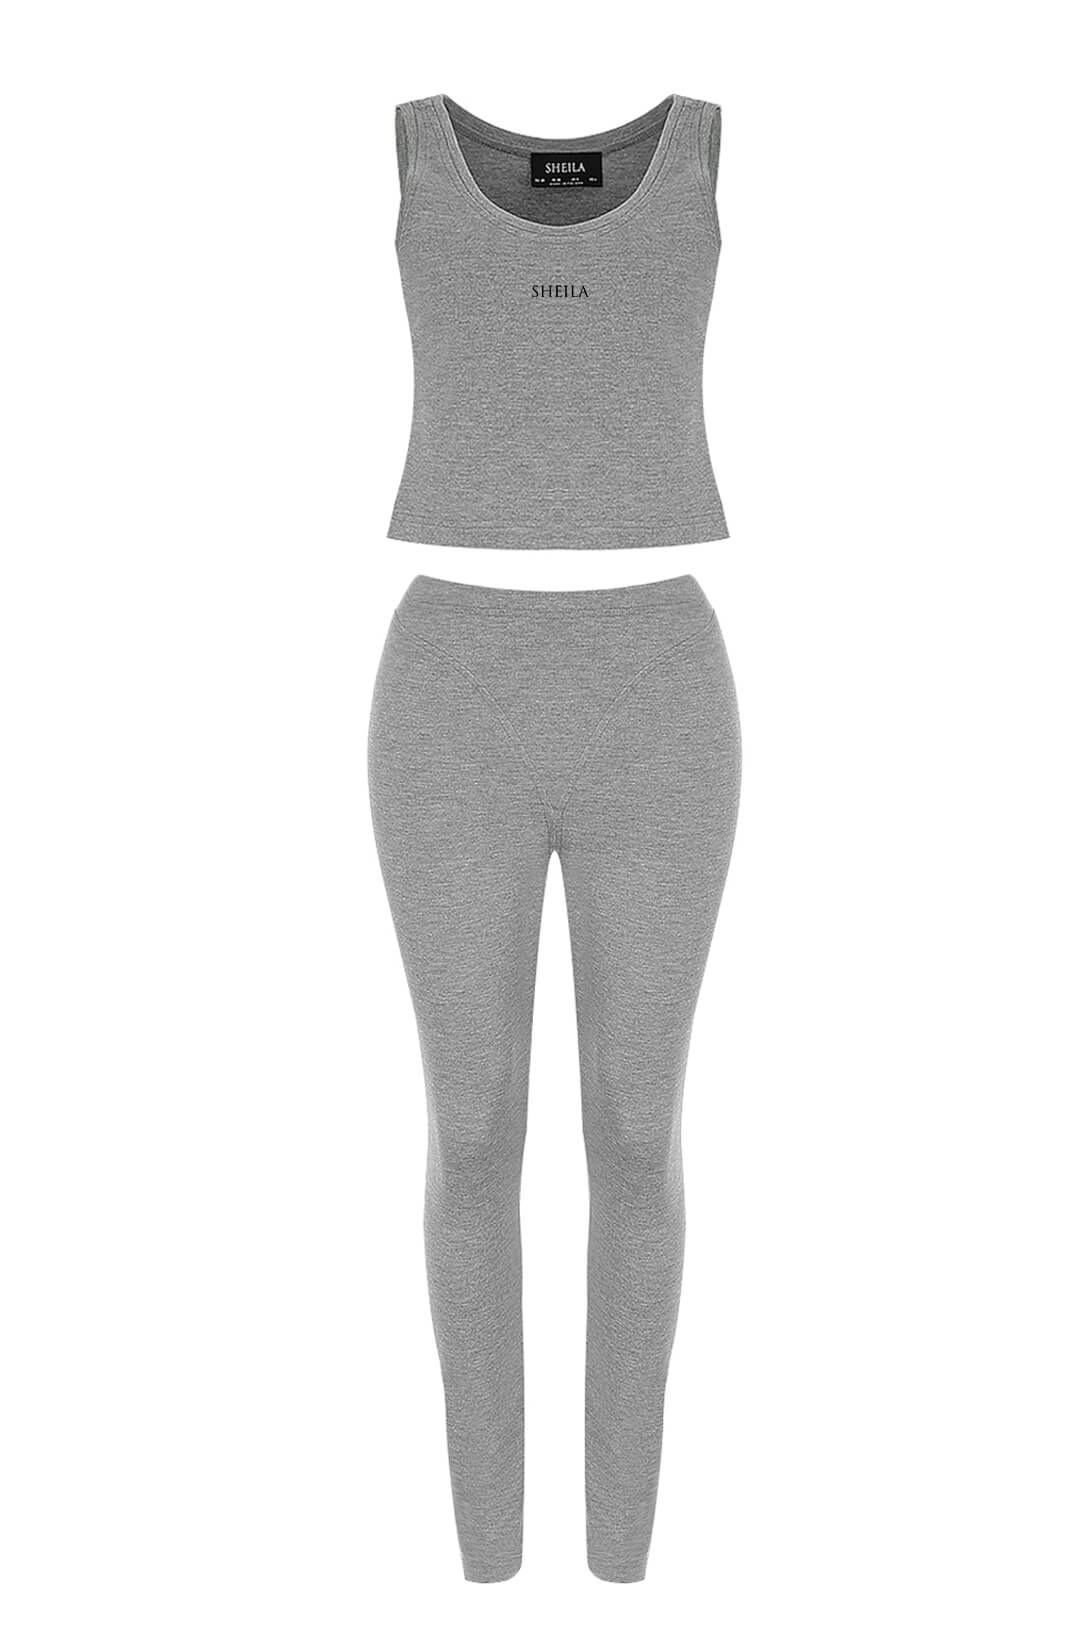 Sheila - Women's black fitted, ribbed sports leggings 'Negro'  CLOTHES \  TRACKSUITS \ TRACKSUIT SETS CLOTHES \ FULL SETS \ TRACKSUITS CLOTHES \ FULL  SETS \ SPORTS SETS CLOTHES \ LEGGINS \